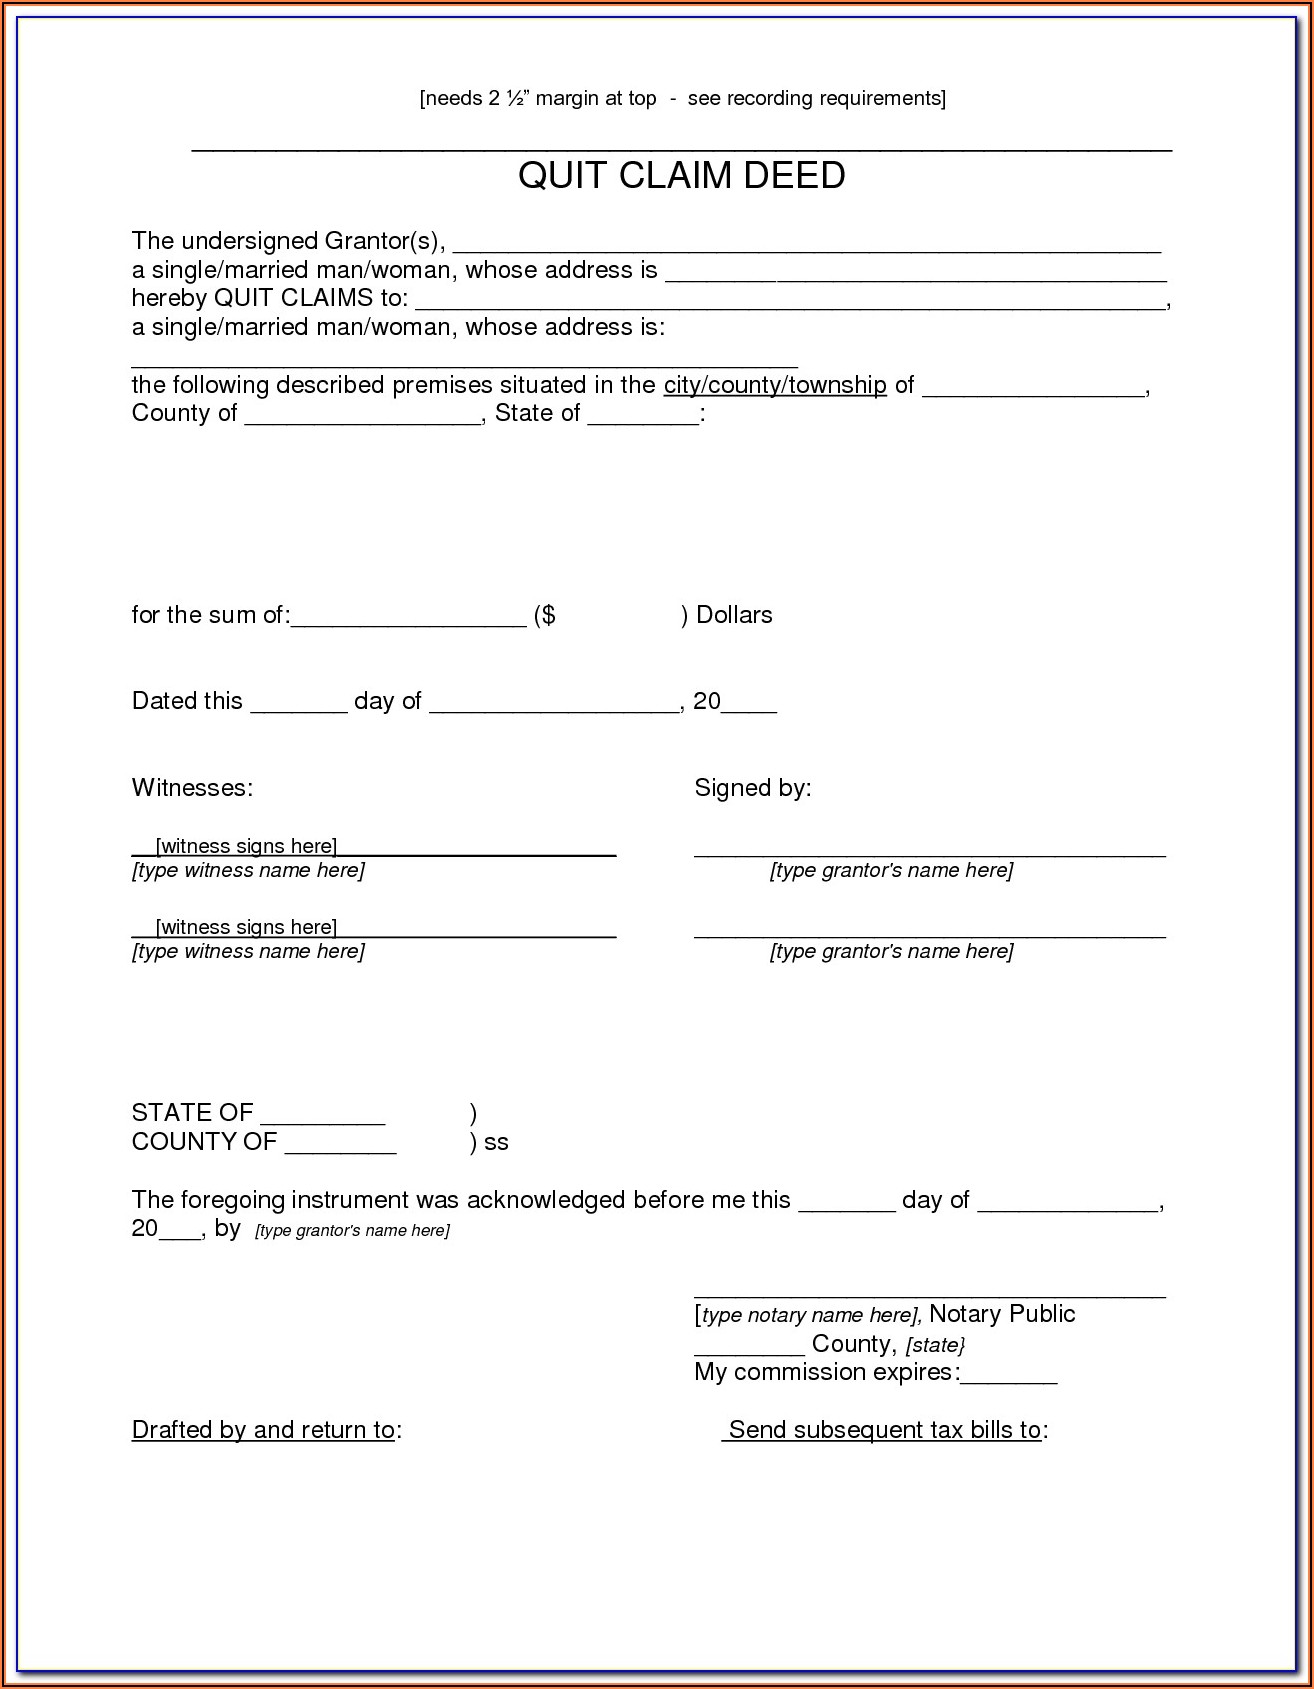 How Do I Fill Out A Quit Claim Deed Form